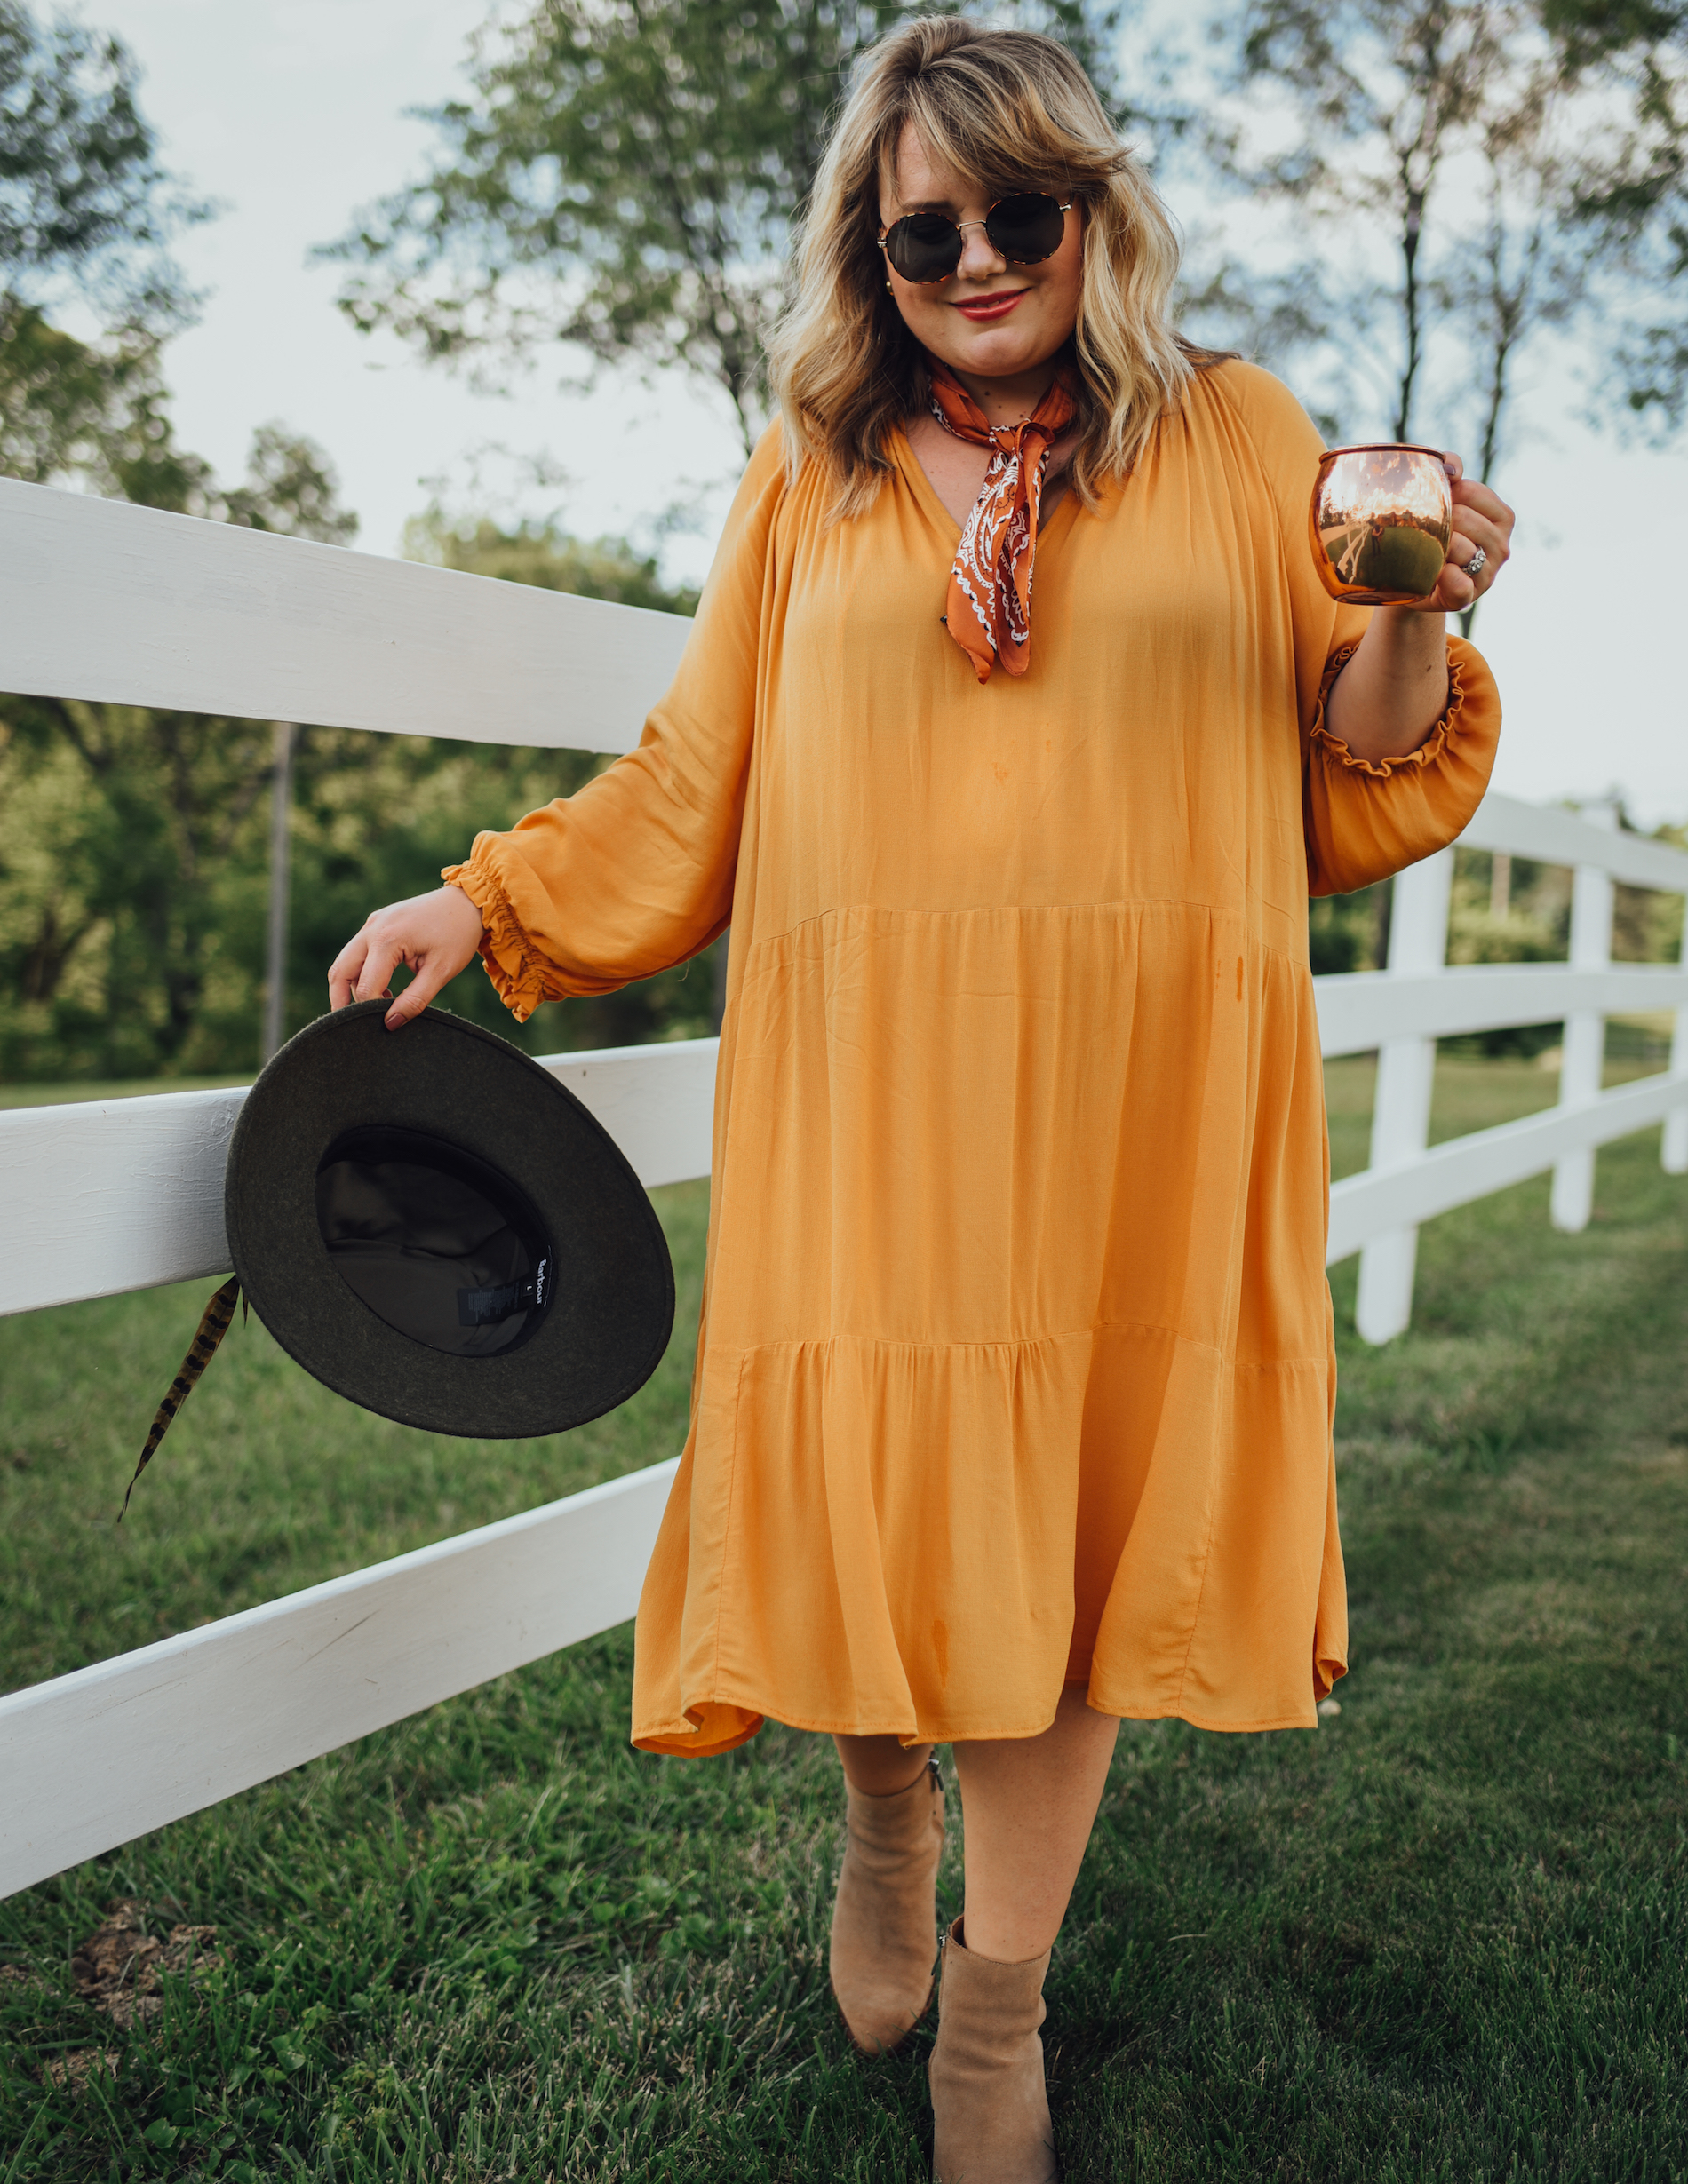 H&M For Fall. Sharing how I styled the perfect fall fashion outfit from H&M! This light weight dress is the perfect color and fabric combo!